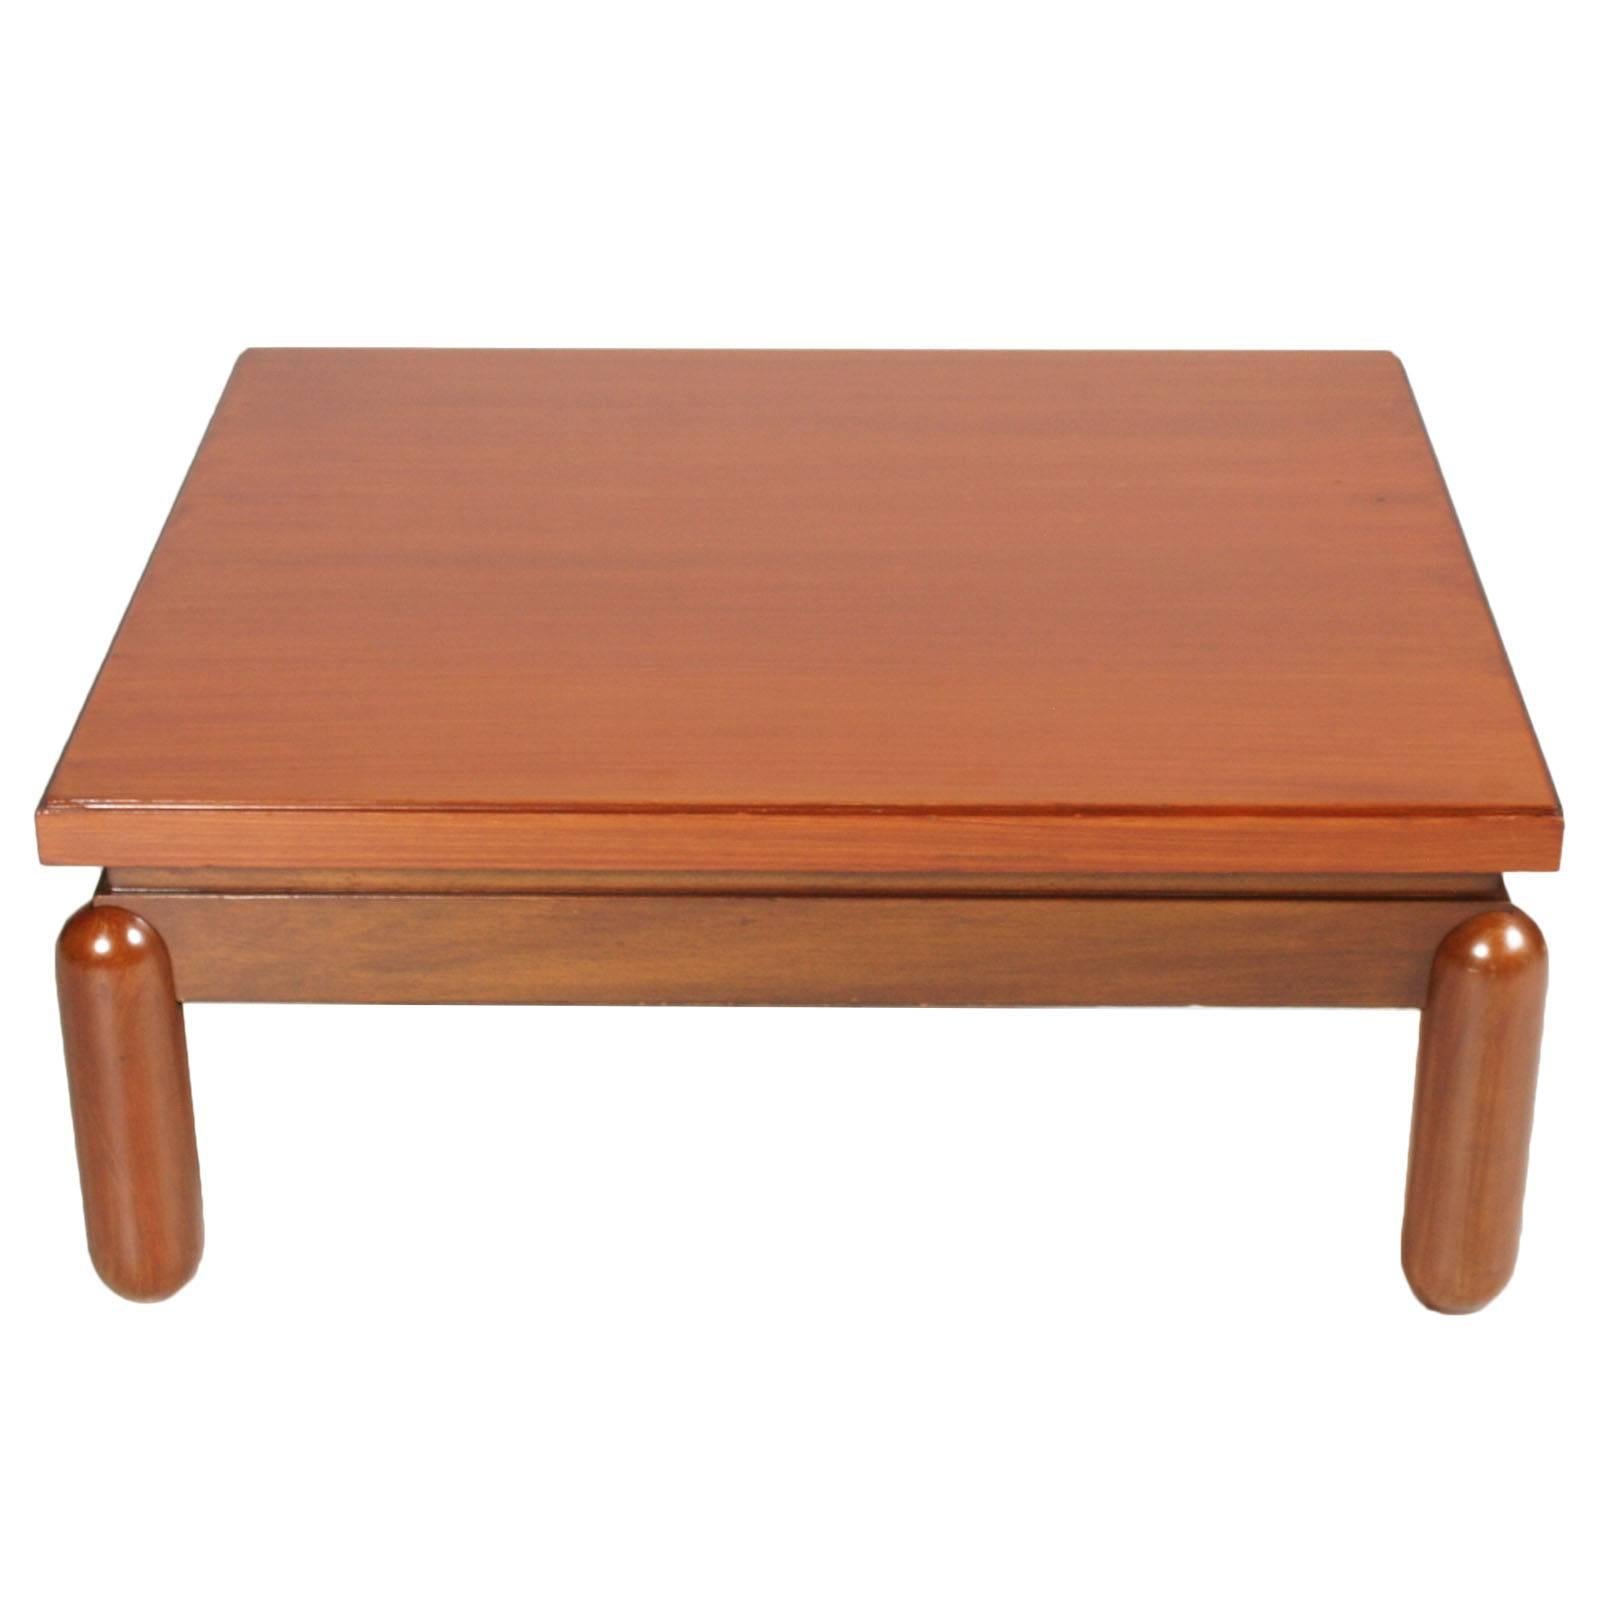 Mid-Century Modern coffee centre table in Afra & Tobia Scarpa Style 1970s in turned beech and walnut applied. Restored and finished to shellac

Measure cm: H 37, W 80, D 80.